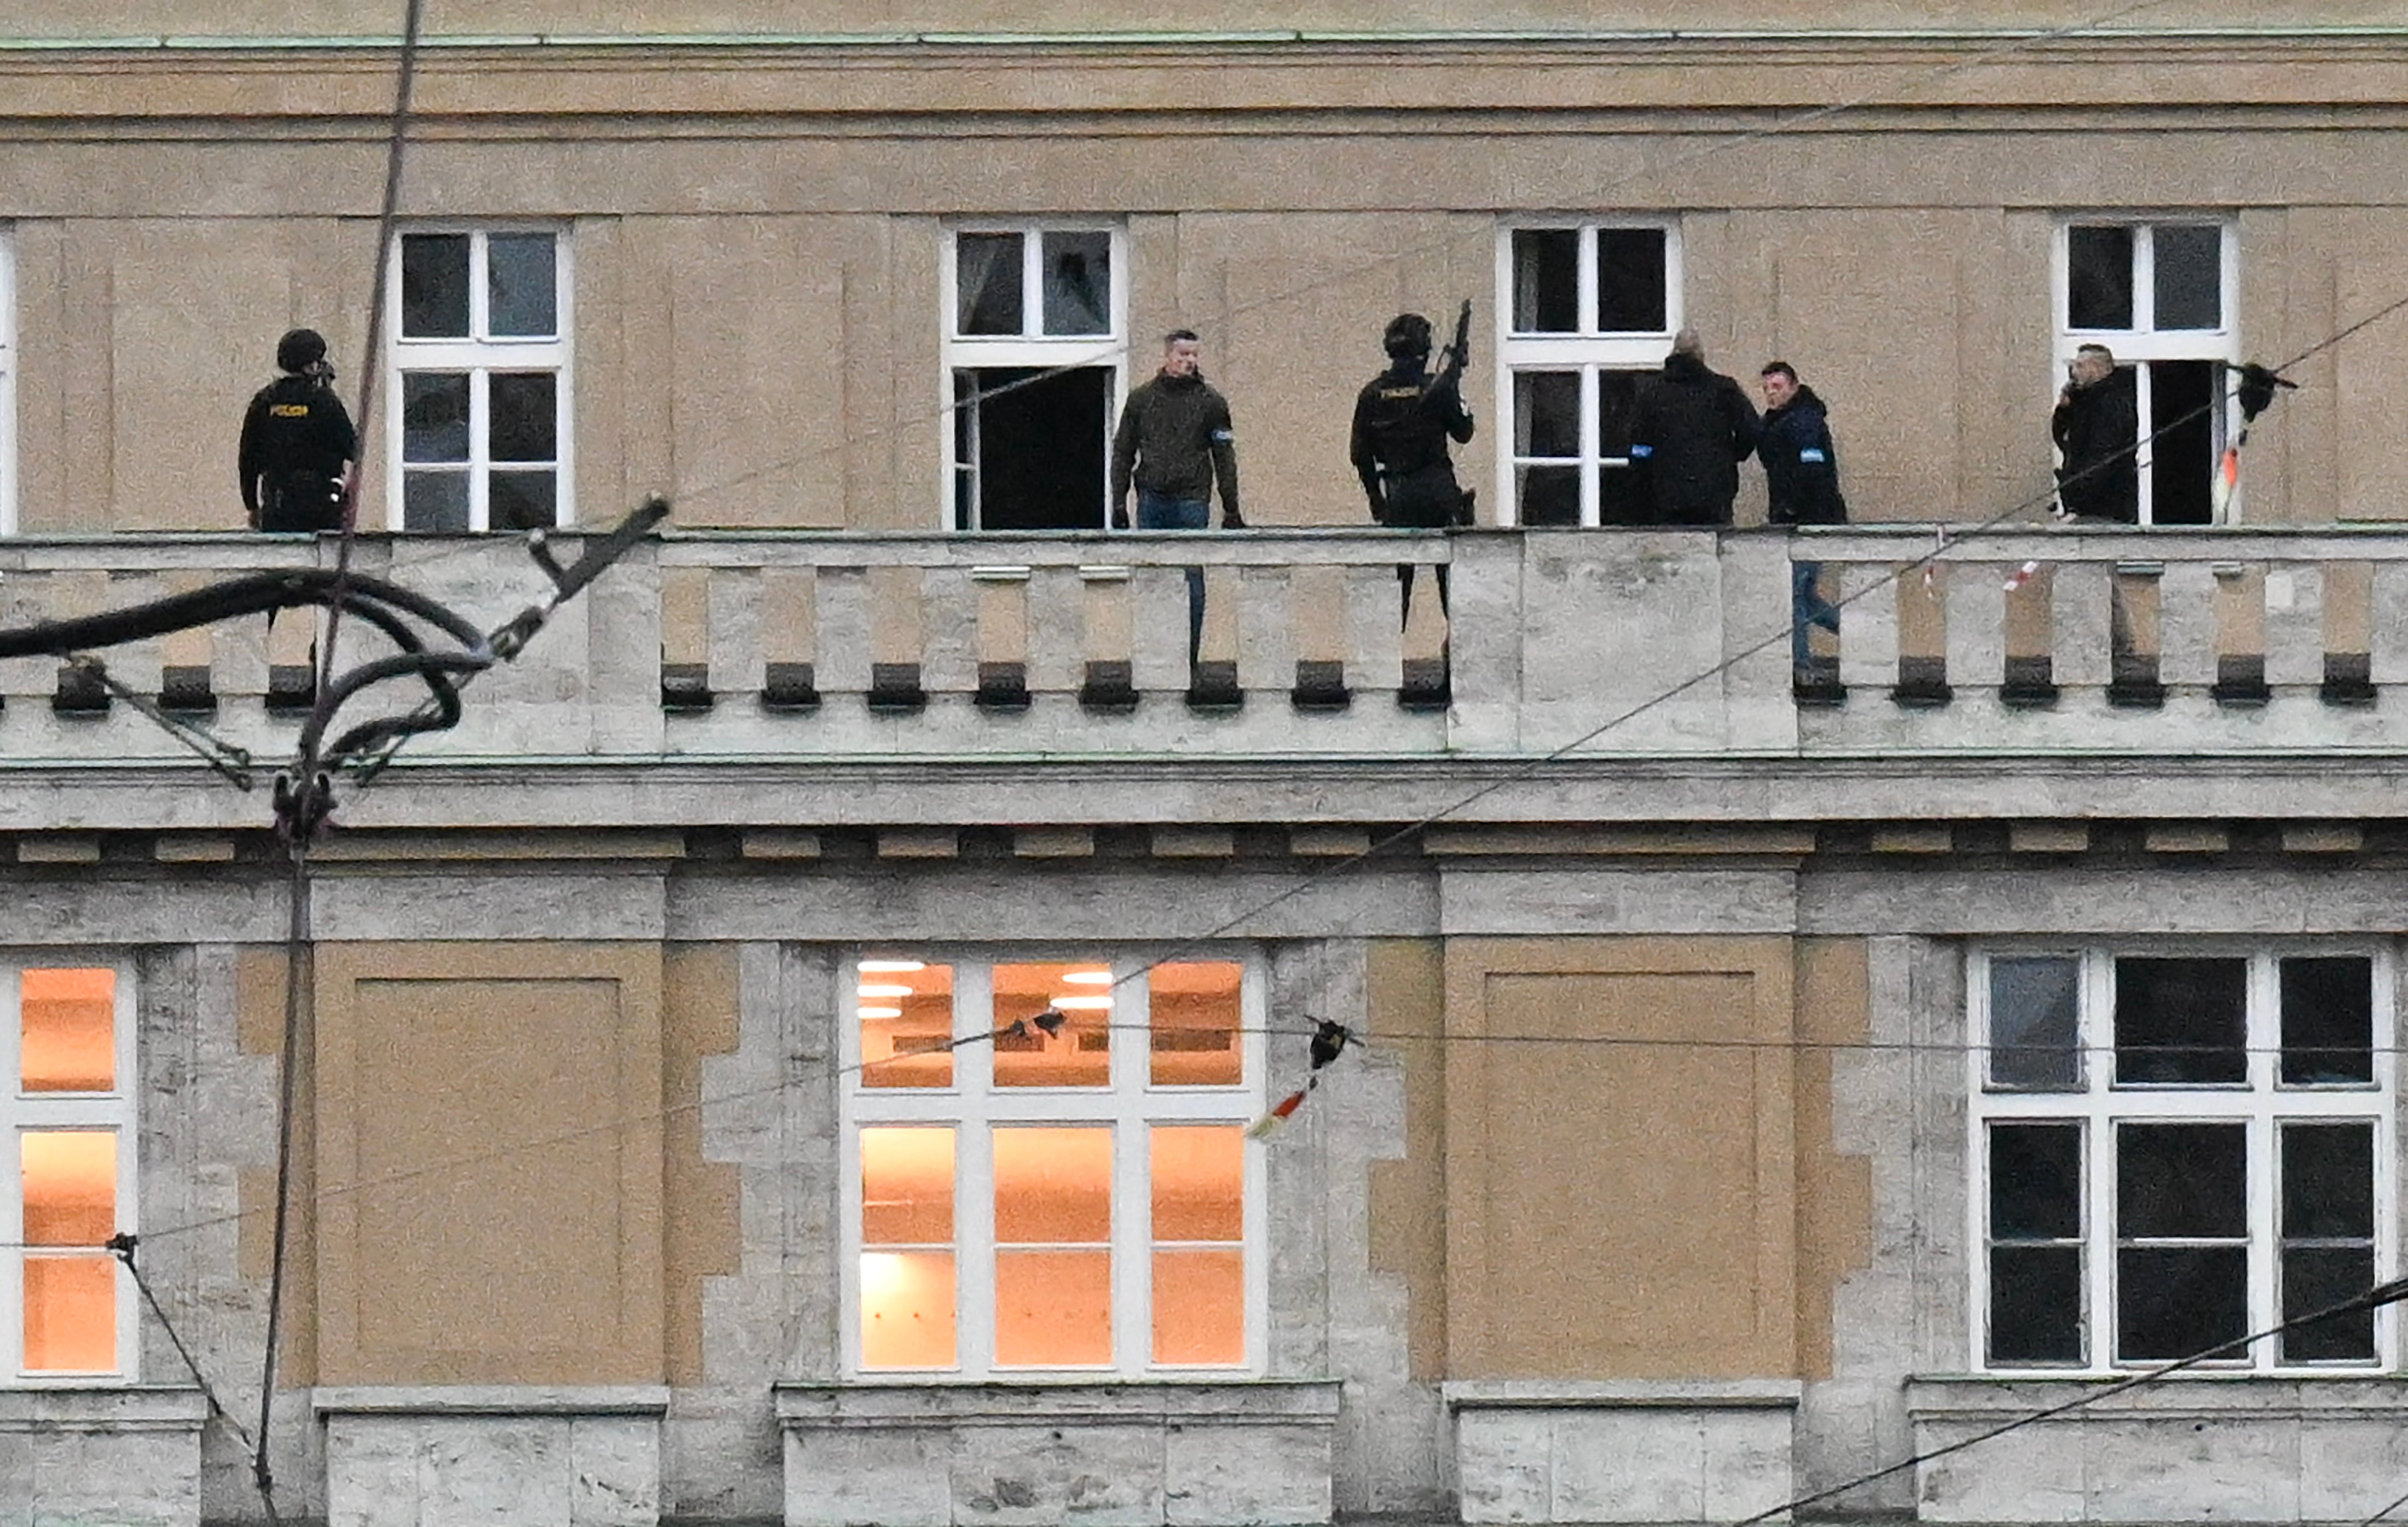 Armed police are seen on the balcony of the Charles University in central Prague